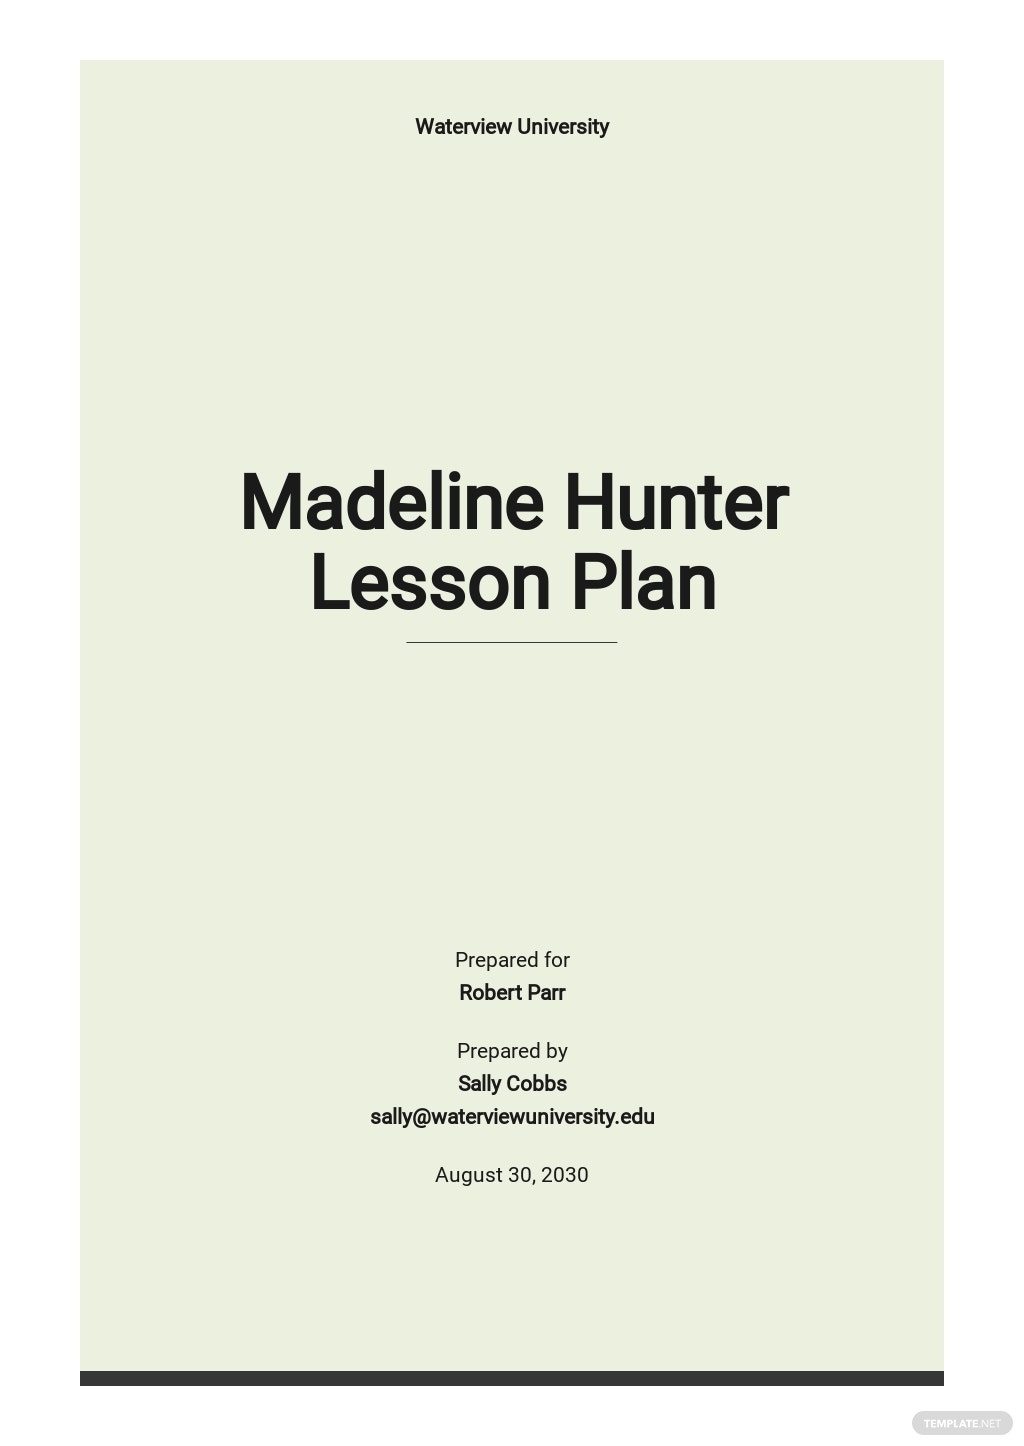 Free Madeline Hunter Lesson Plan Templates, 5+ Download In Pdf, Word With Madeline Hunter Lesson Plan Blank Template